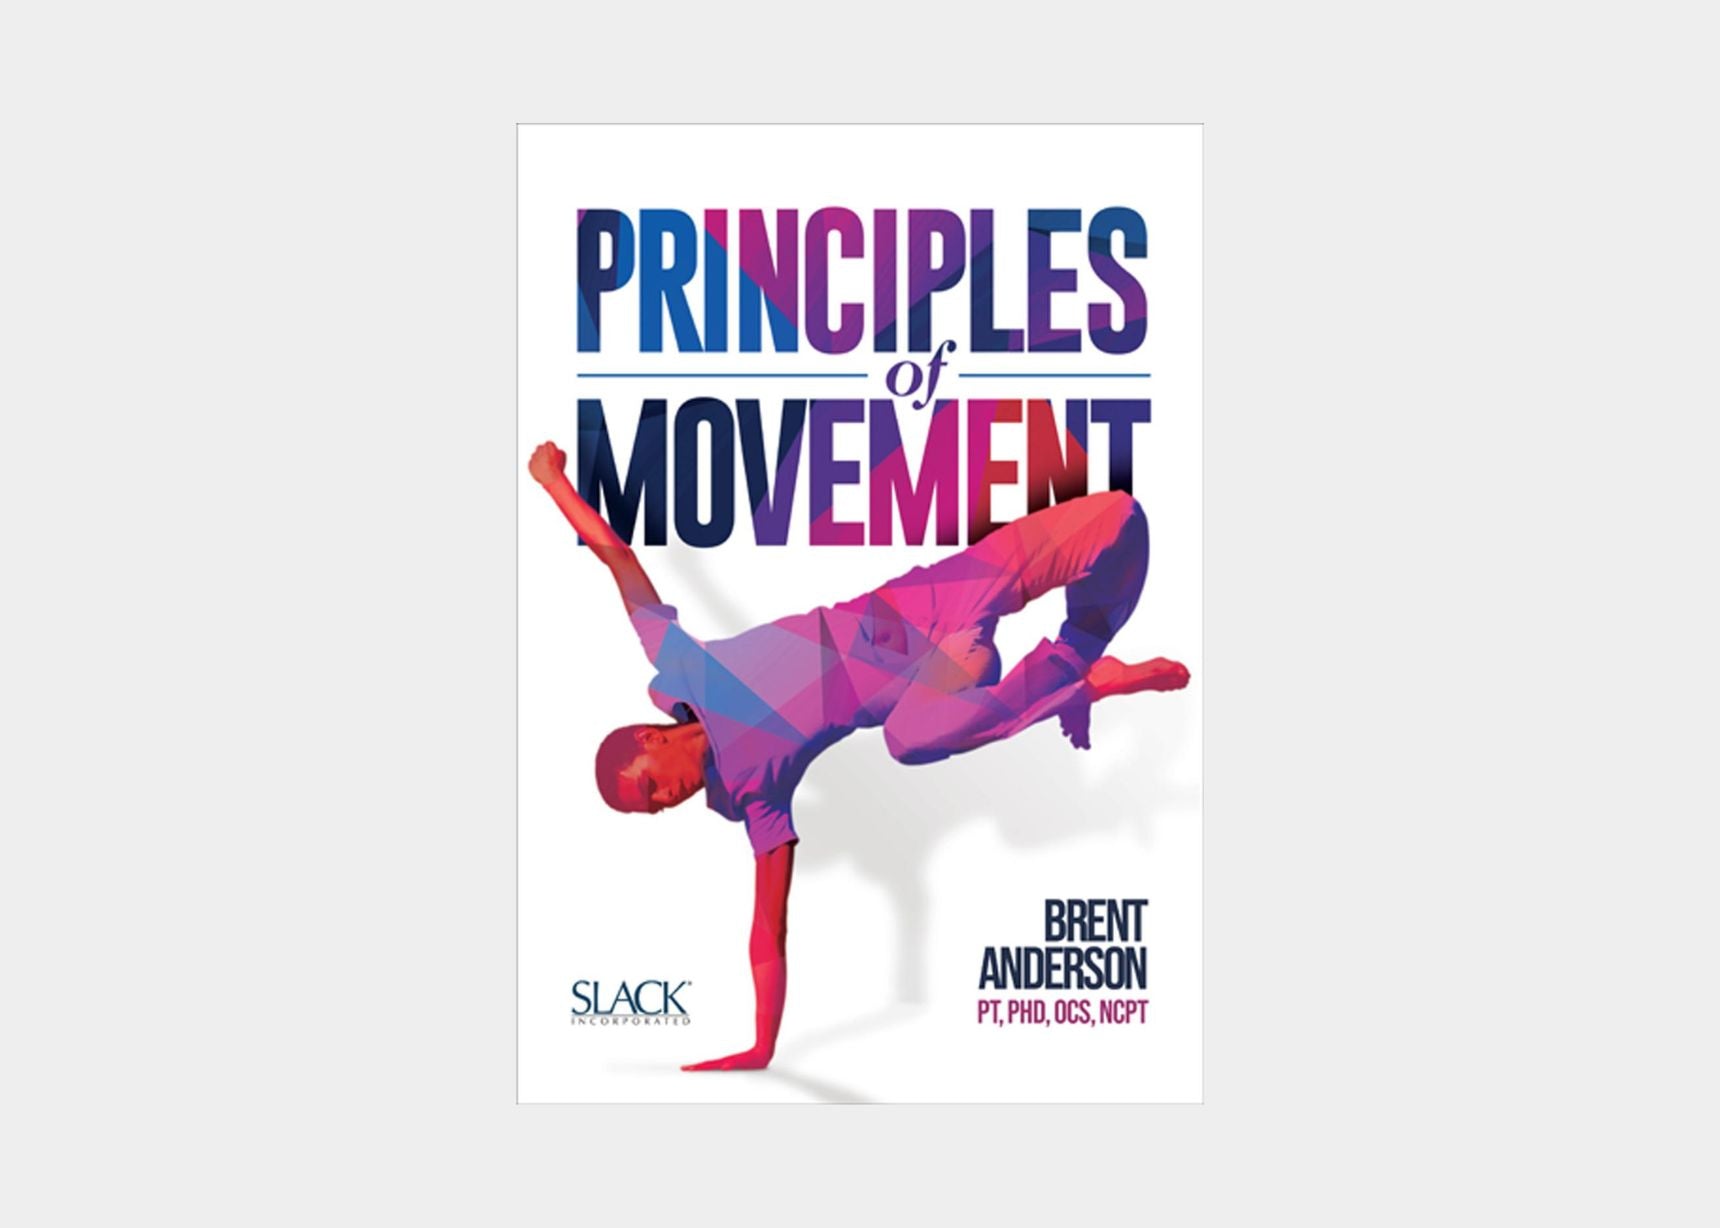 Principles of Movement by Brent Anderson